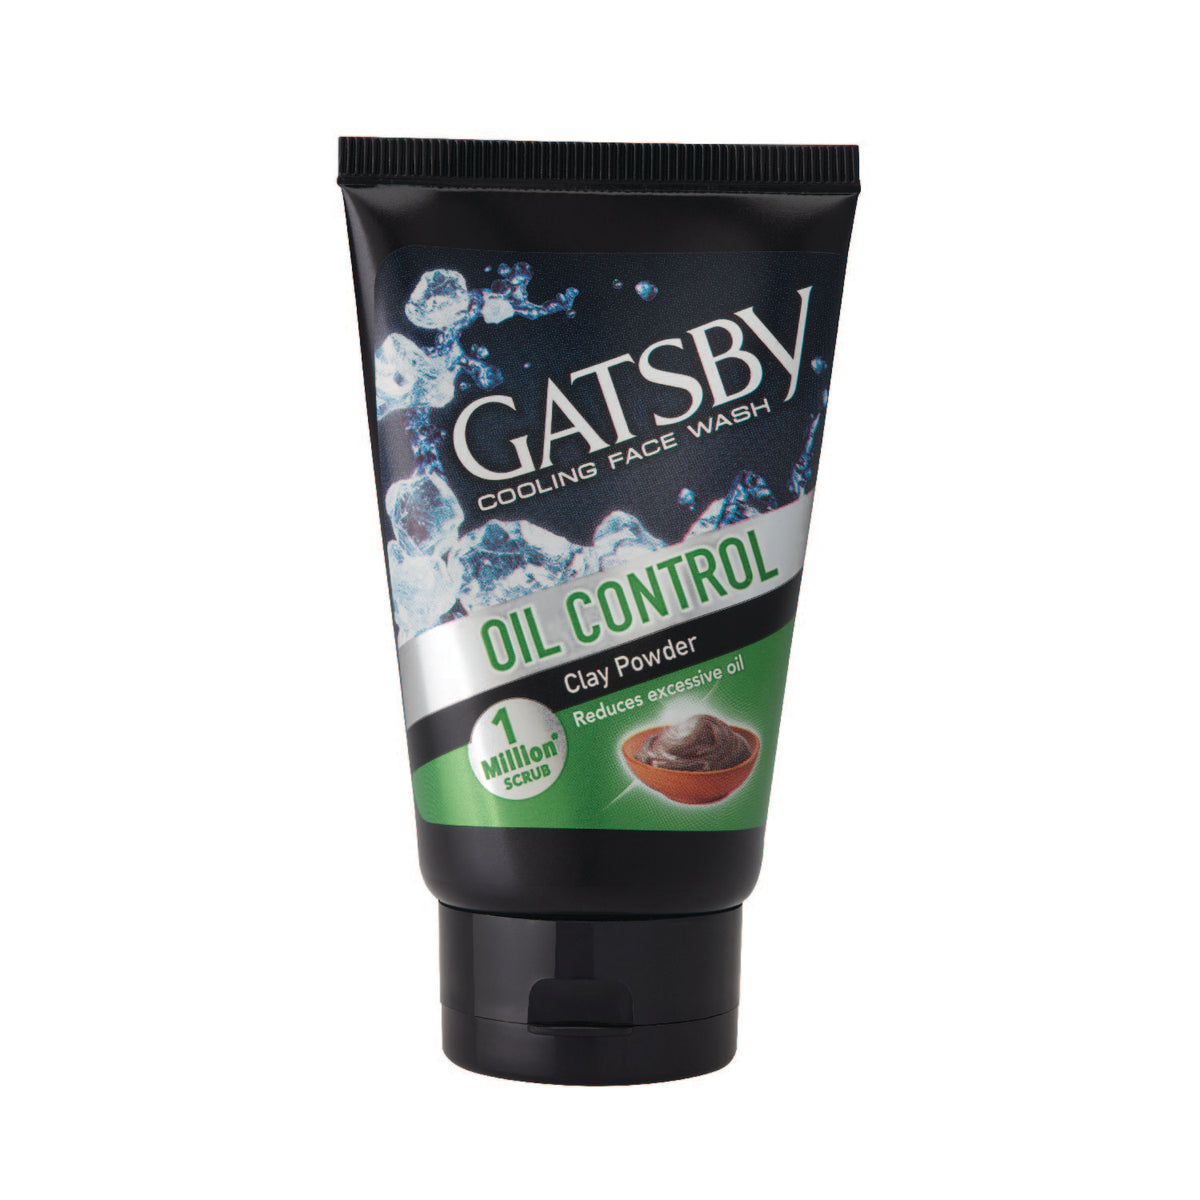 Gatsby Cooling Face Wash - Oil Control, 50g Gardenia Cosmotrade LLP